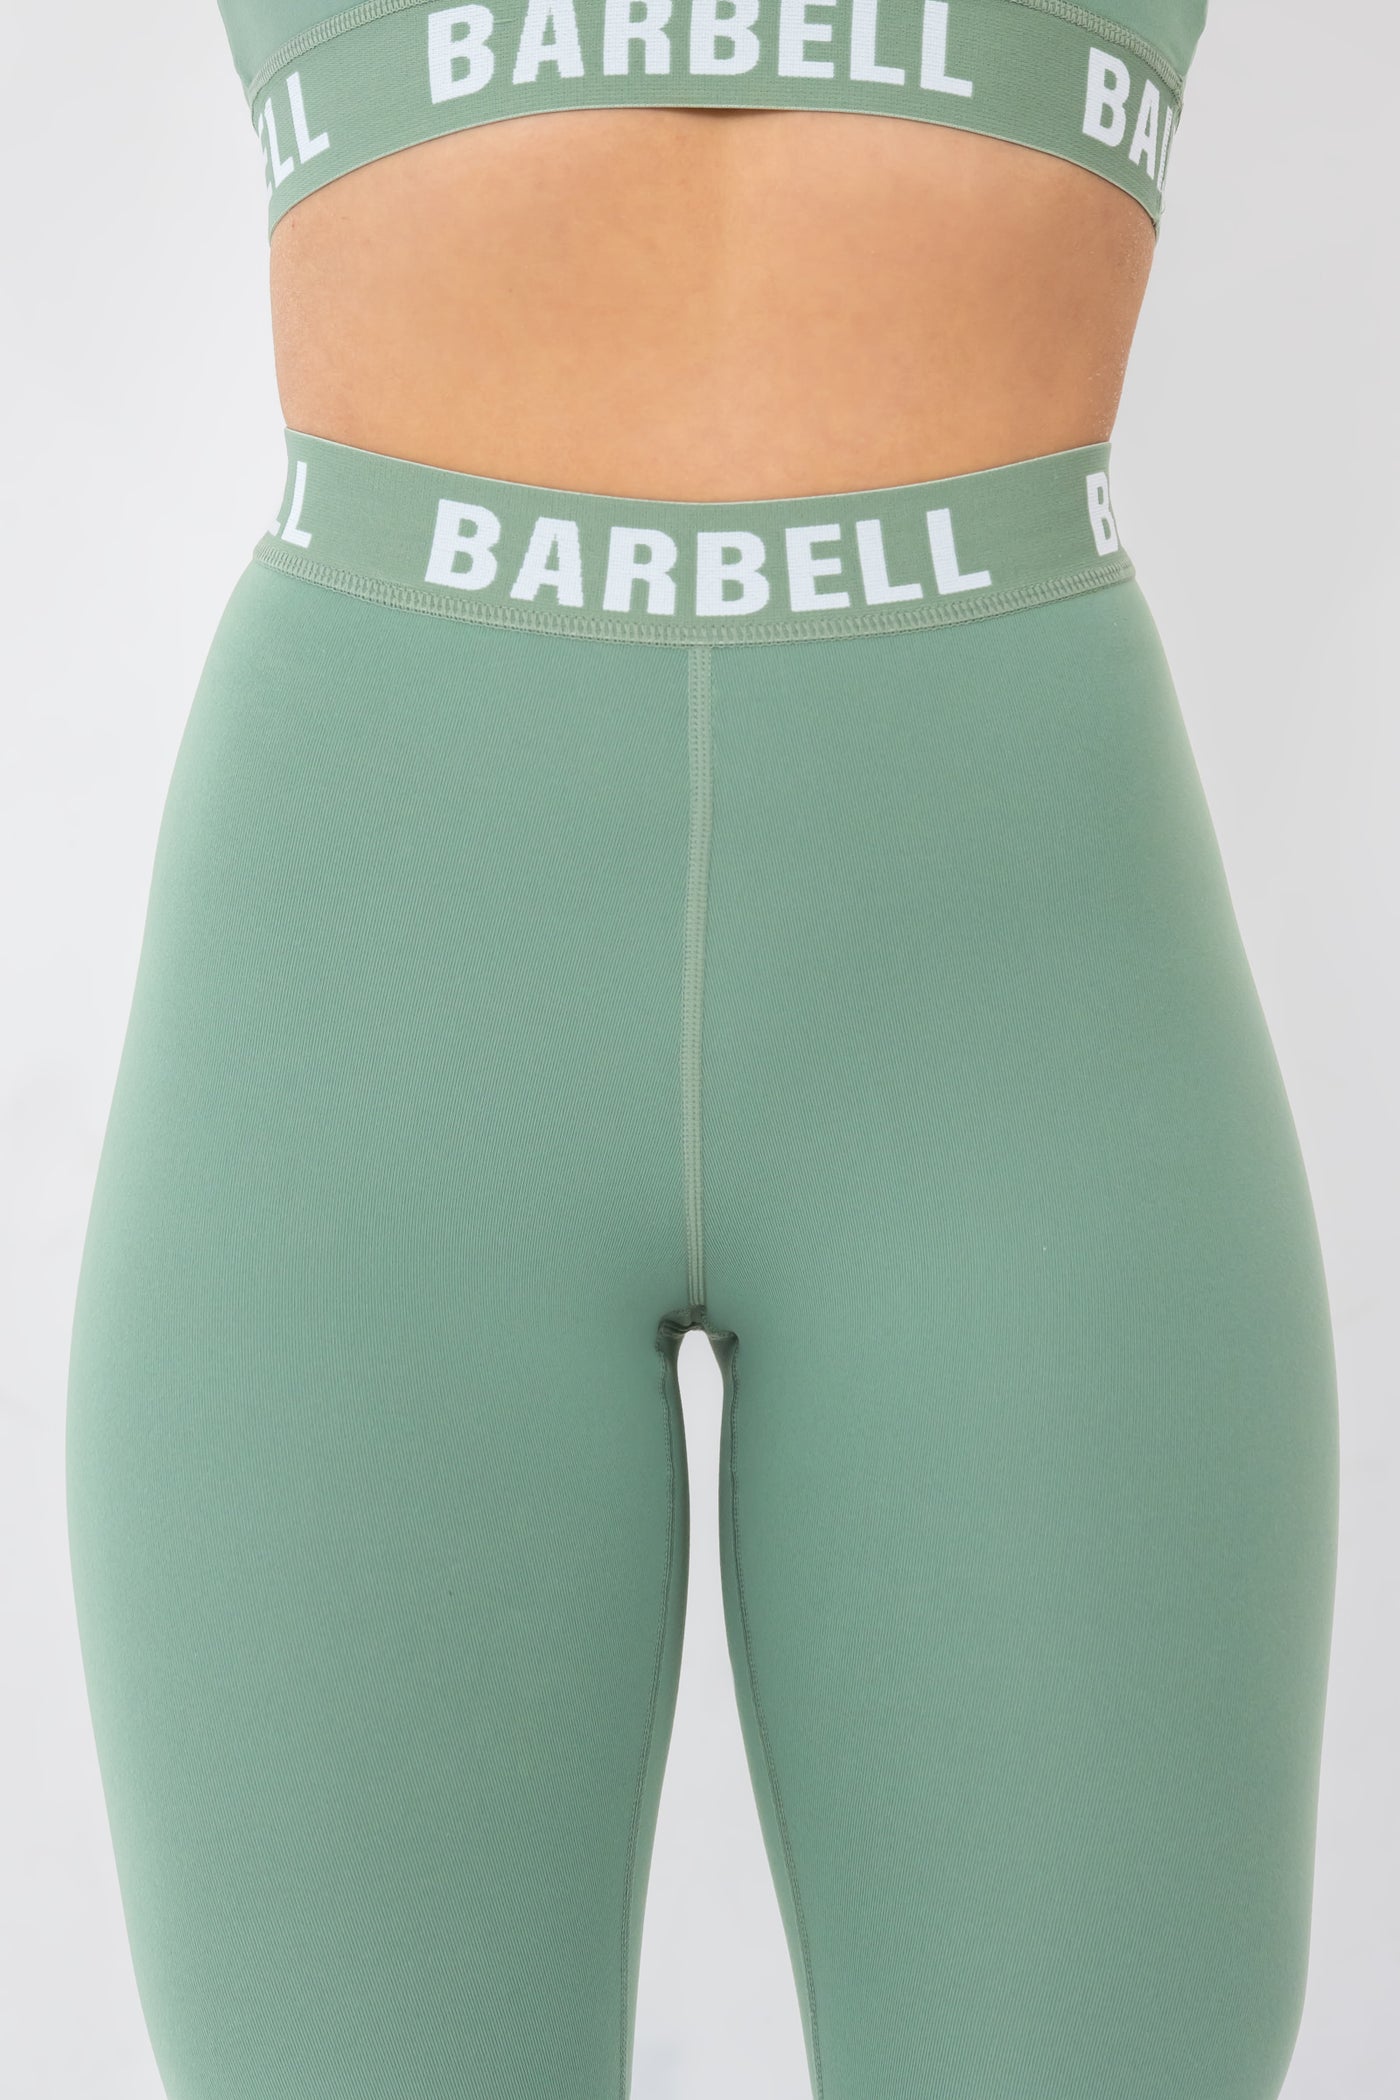 Barbell Barbell Leggings-Basil - photo from front detail #color_basil